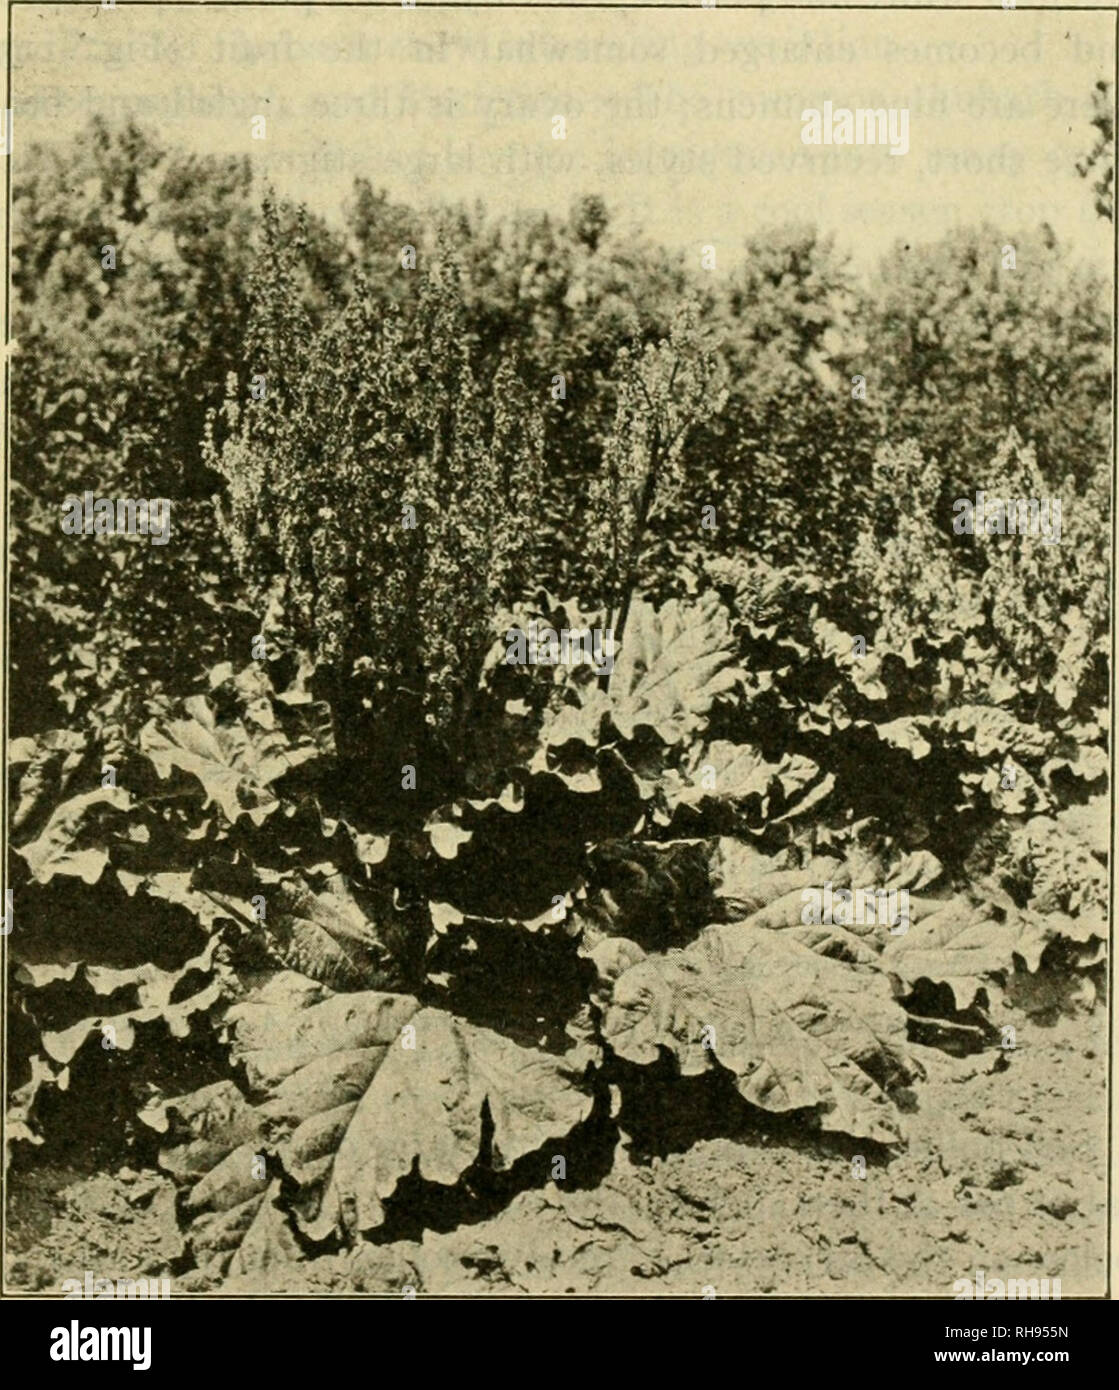 . The botany of crop plants; a text and reference book. Botany, Economic. POLYGONACE^ 287 the season, there arise tlower shoots, bearing elongated leafy inflorescences, crowded with small whitish flowers. Unless seed is desired, flower shoots should be promi)tly removed,. Fig. 112.—Rhubarb (Rheum rhaponticum) plant, in fruit. as they require considerable food supply which should go to the support of the roots. The leaves are large, circular in outline, cordate at the base, and with sinuate veins beneath; leaf petioles are semi-cylindrical and bear membran-. Please note that these images are ex Stock Photo